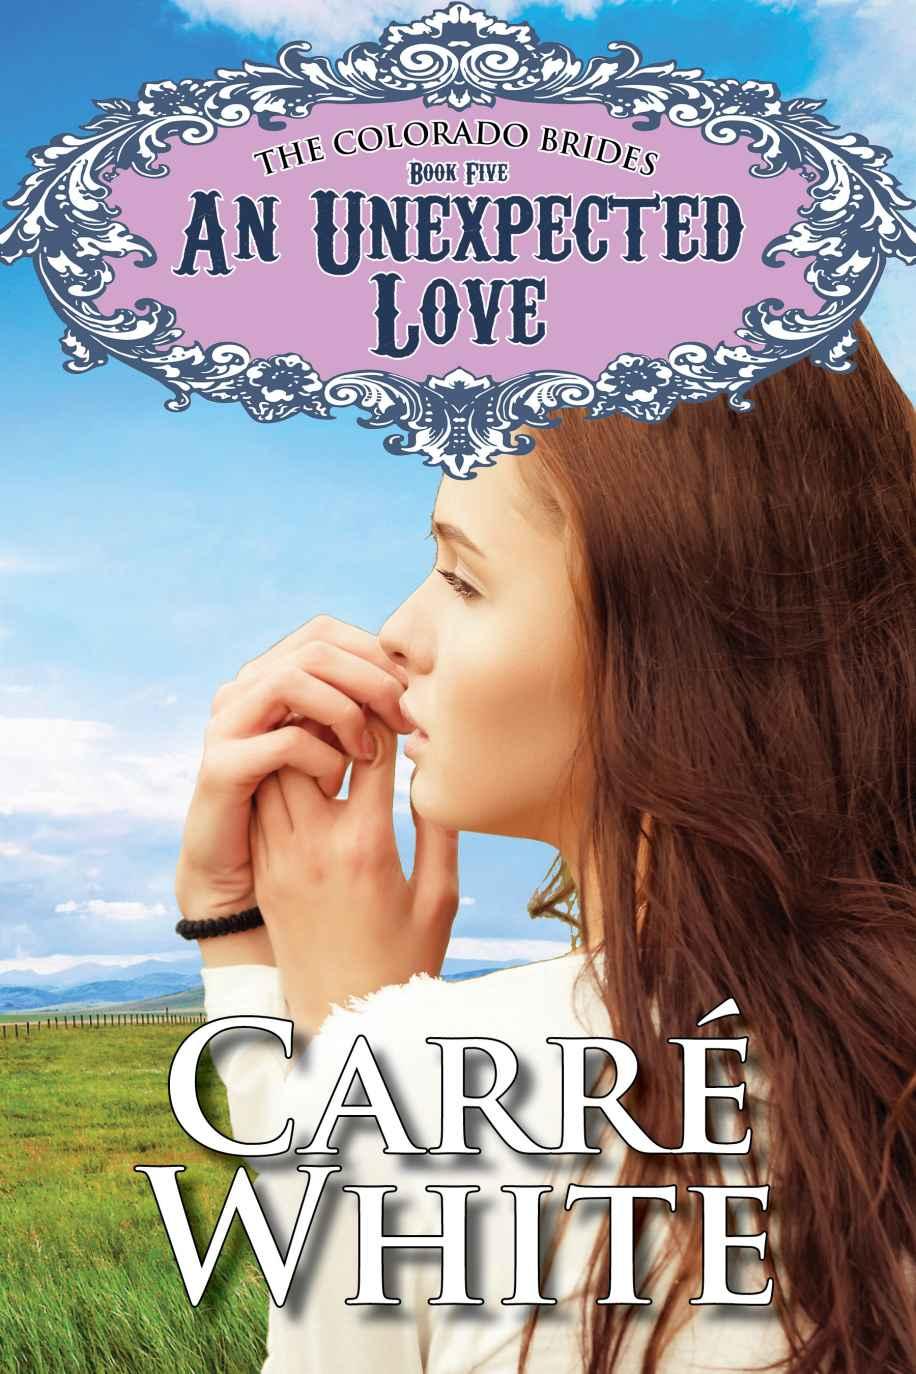 An Unexpected Love (The Colorado Brides Series Book 5) by Carré White